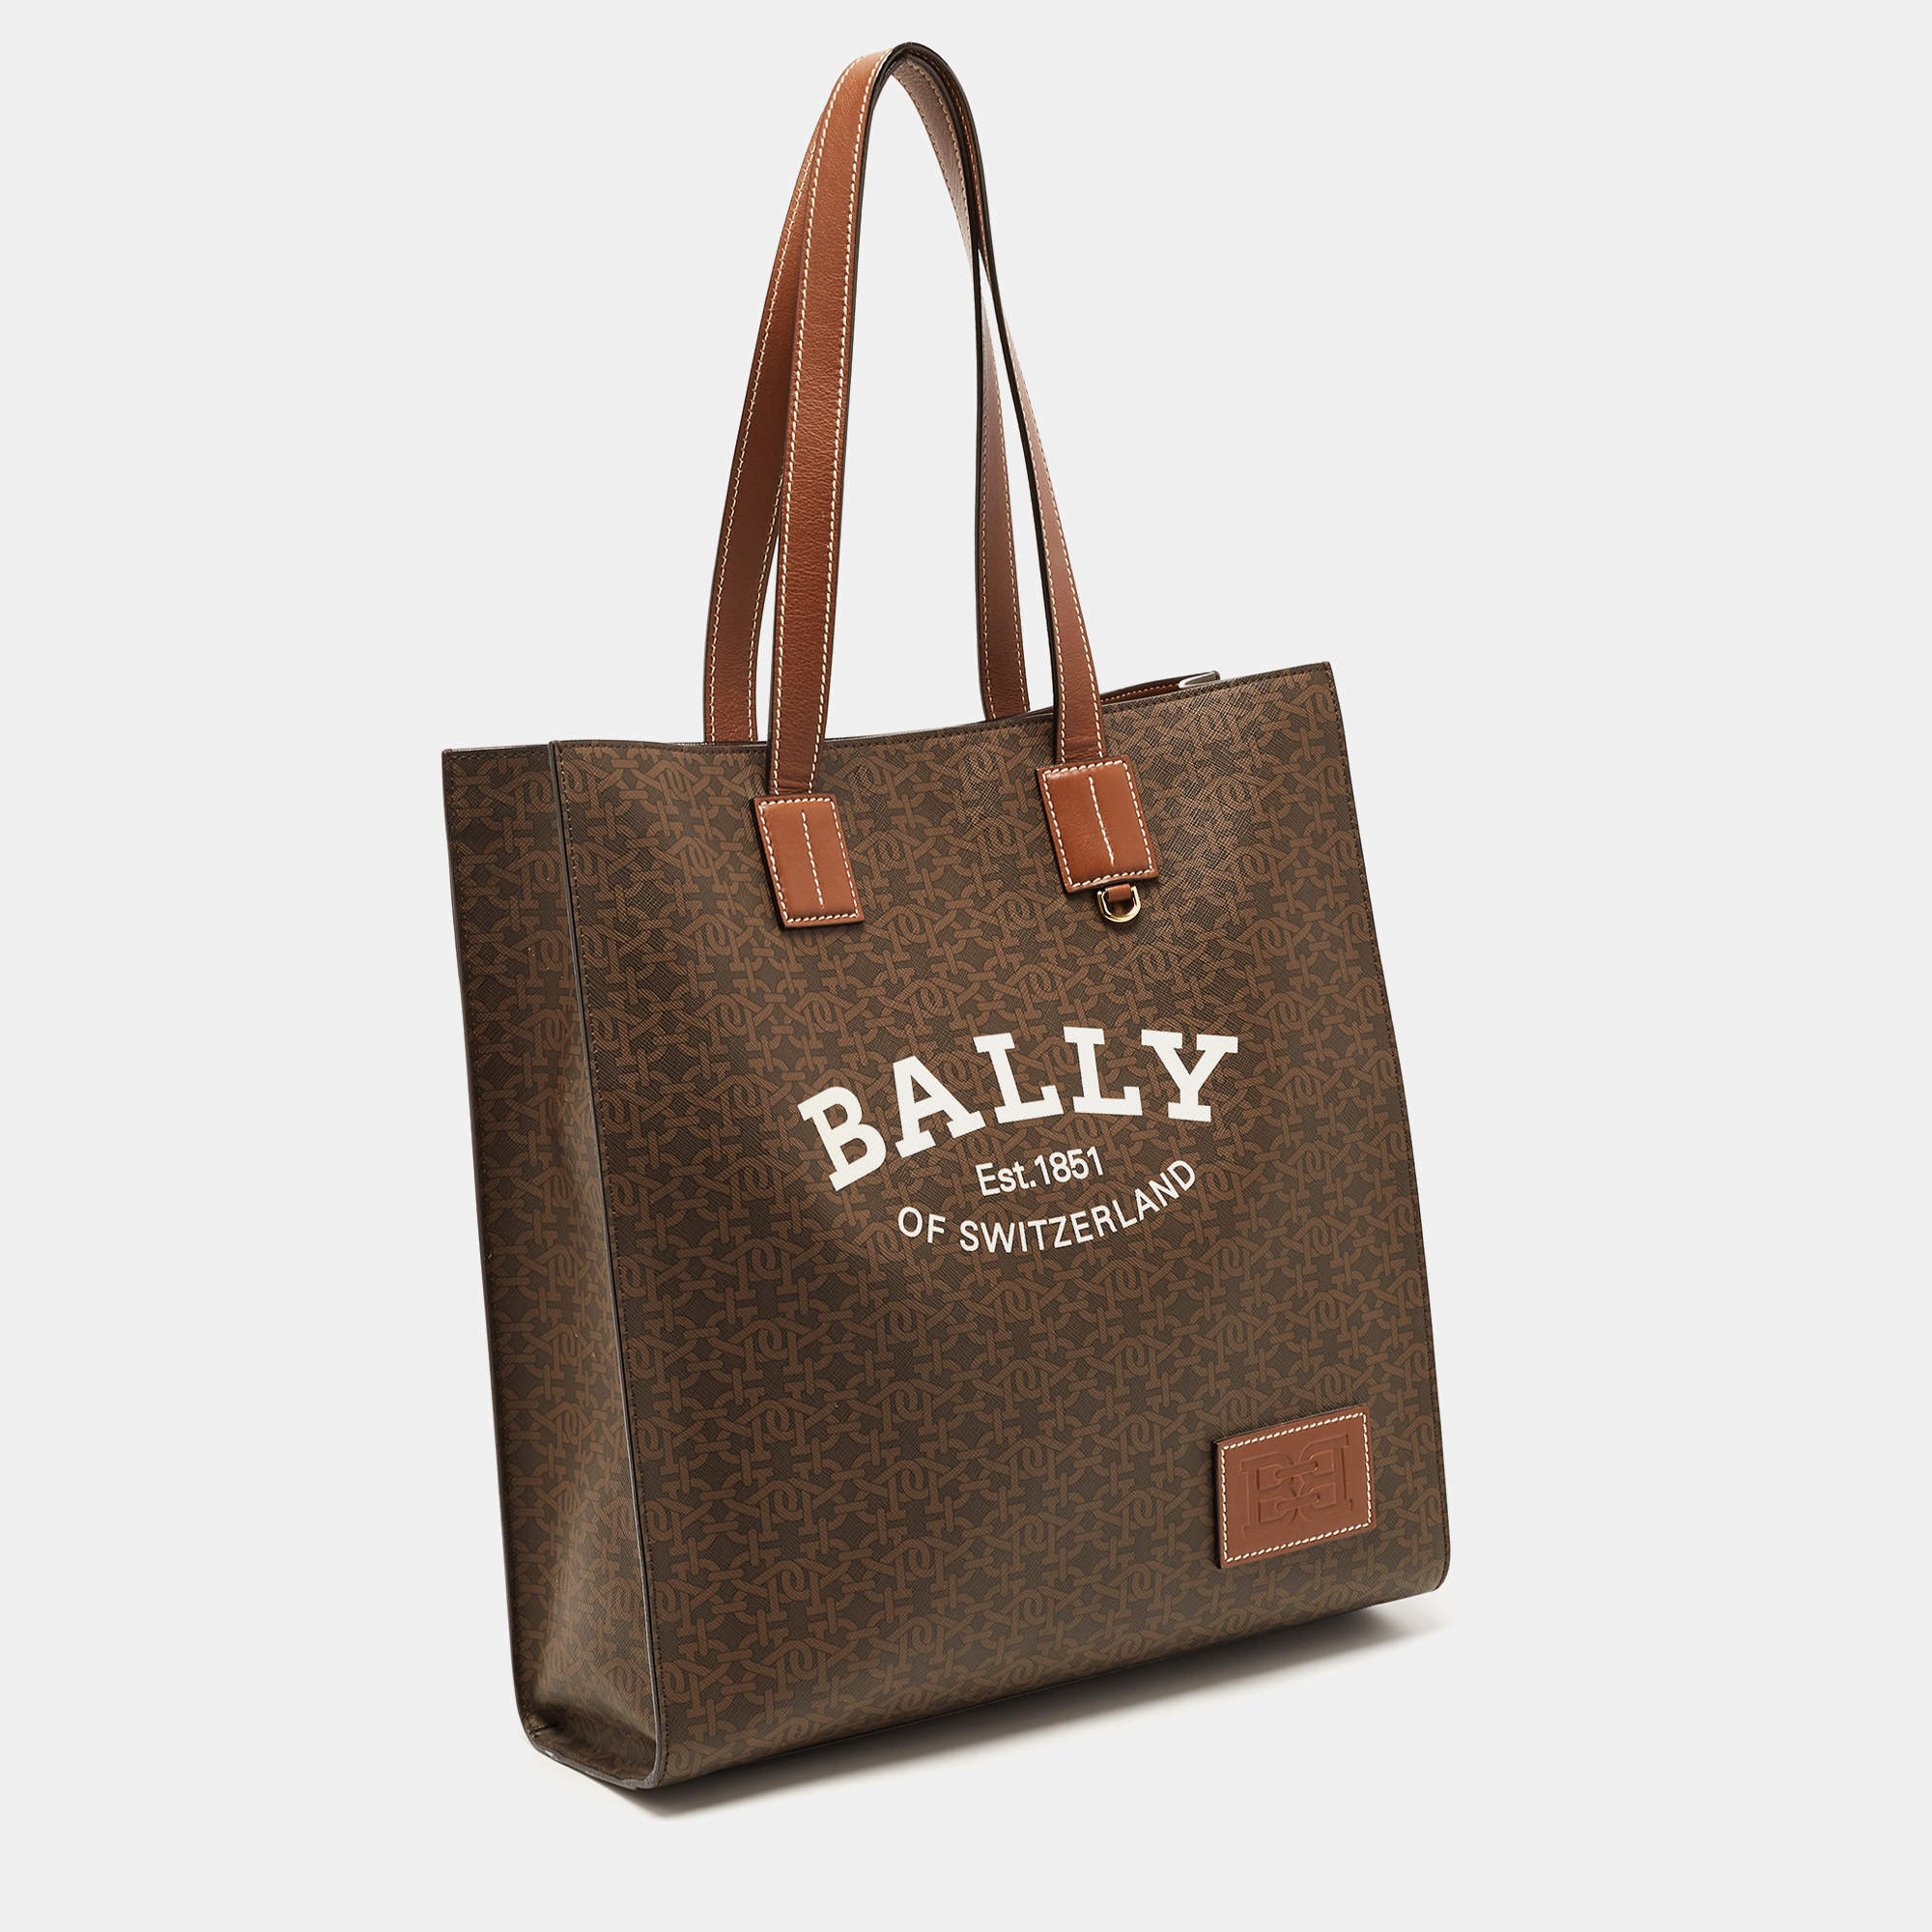 Bally Large Coated Canvas Tote Bag in Blue